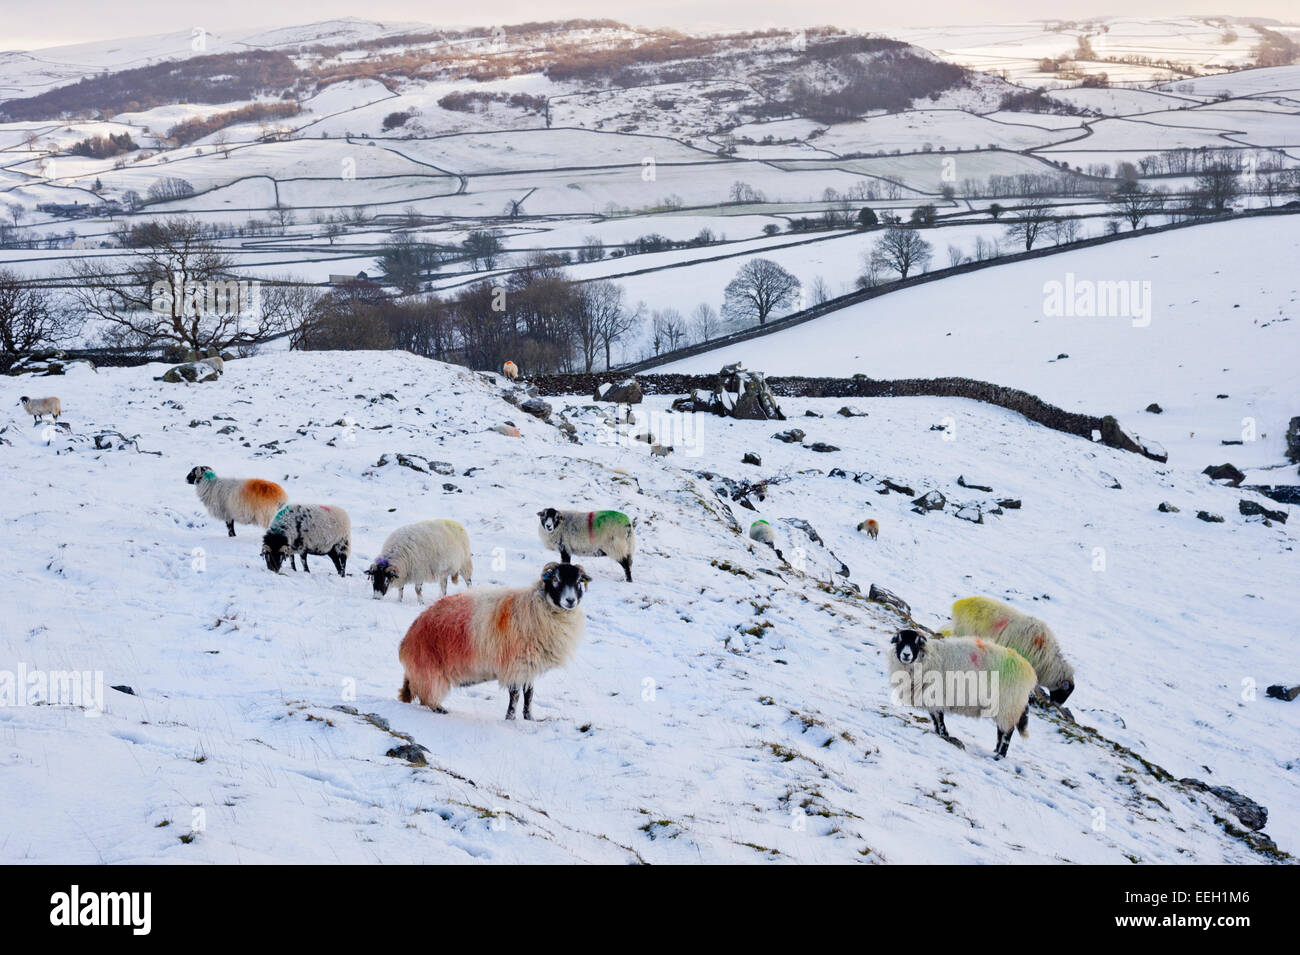 Swaledale sheep grazing on the snow-covered Norber plateau above the village of Austwick, Yorkshire Dales National Park, UK Stock Photo